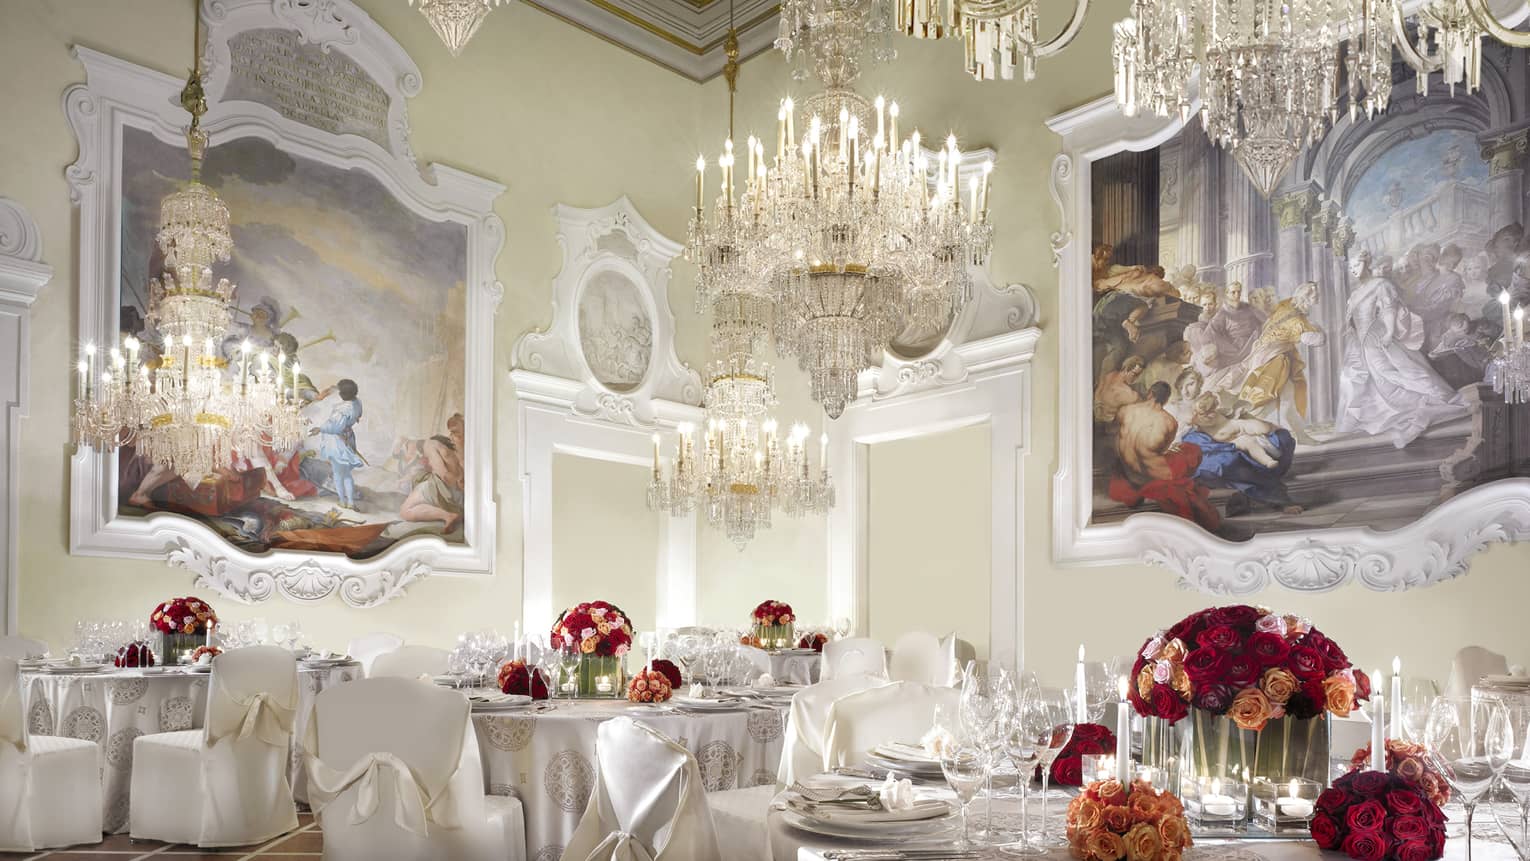 Gherardesca ballroom with large crystal chandeliers, paintings over elegant banquet tables 